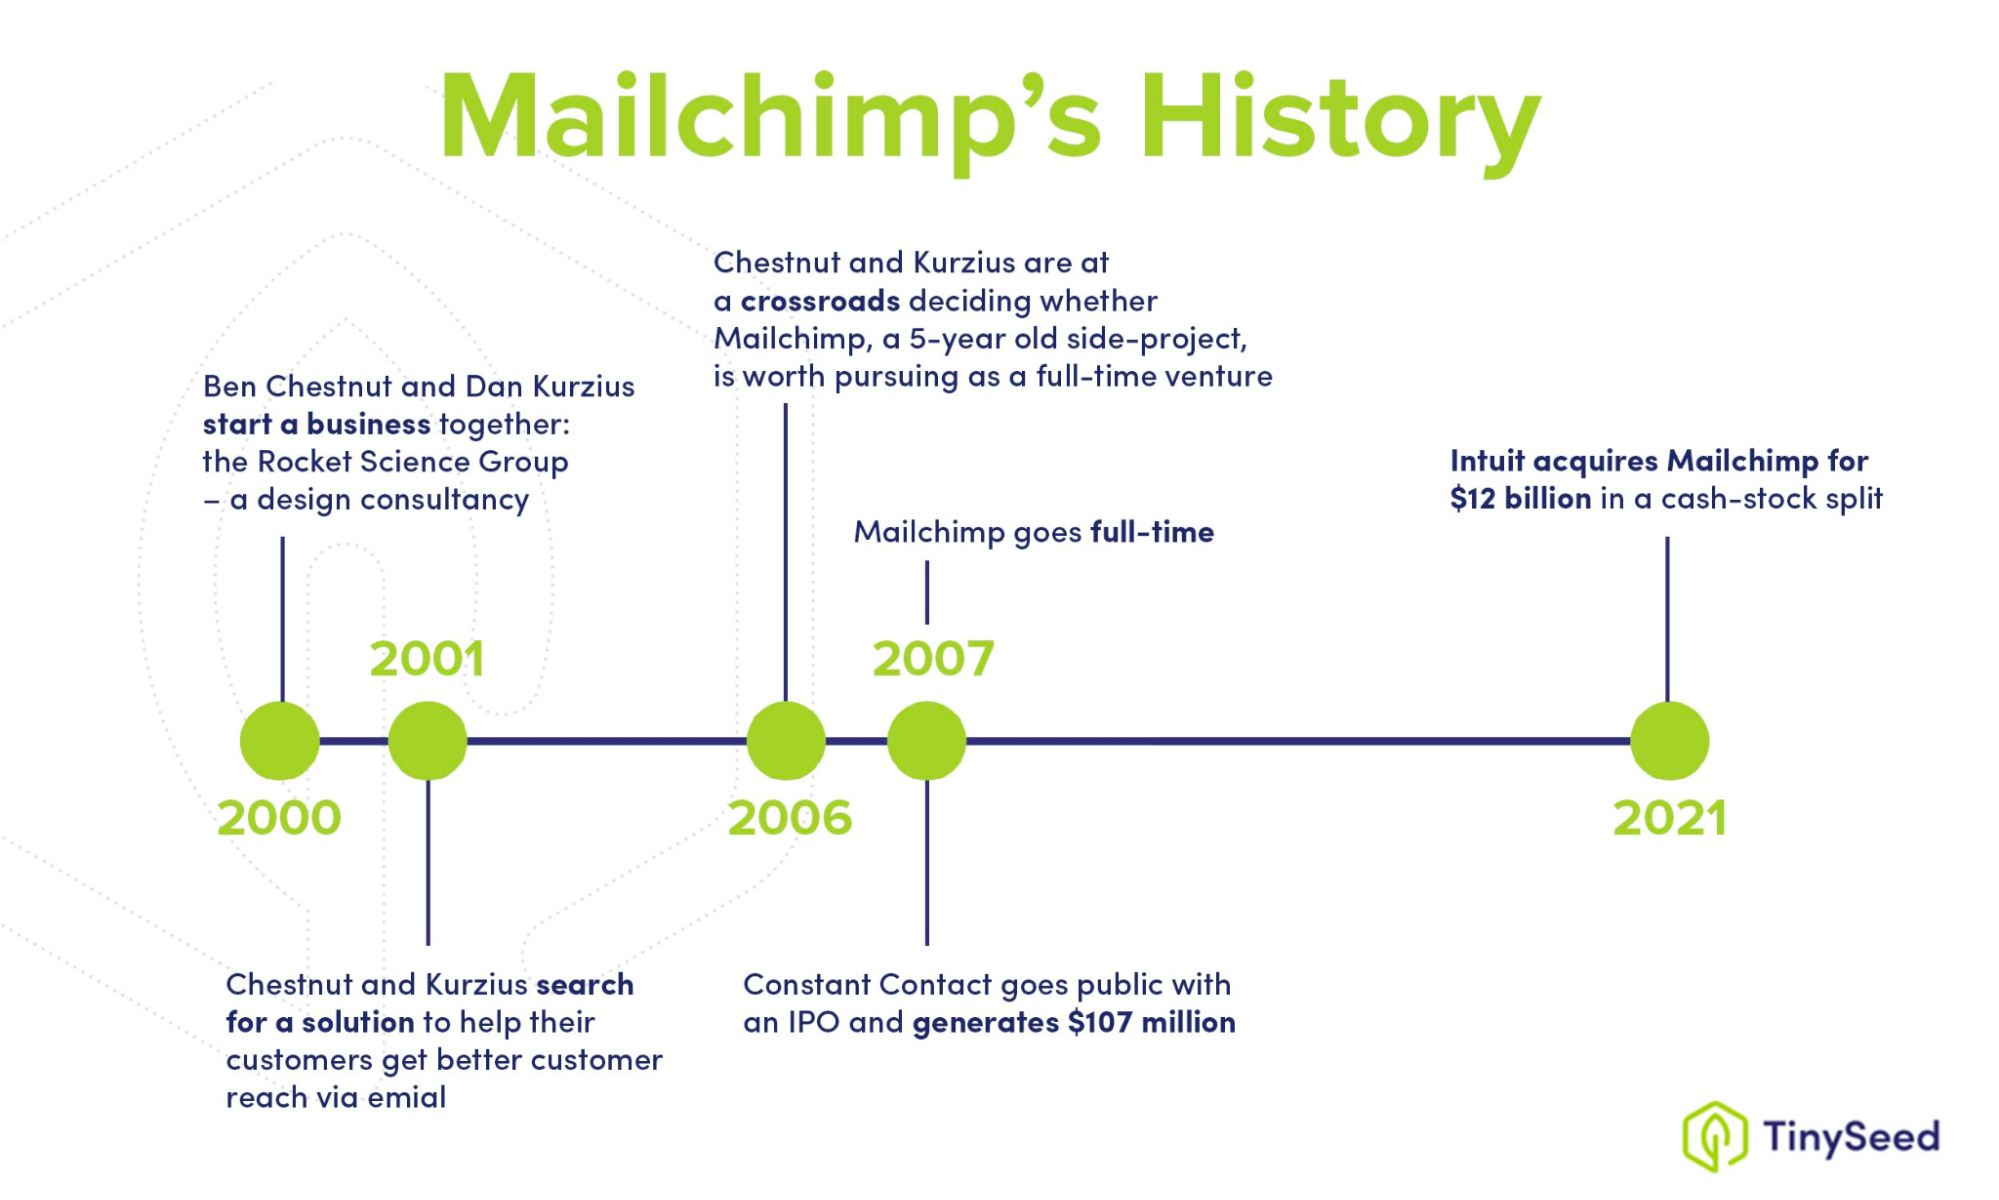 Mailchimp's history in a timeline format